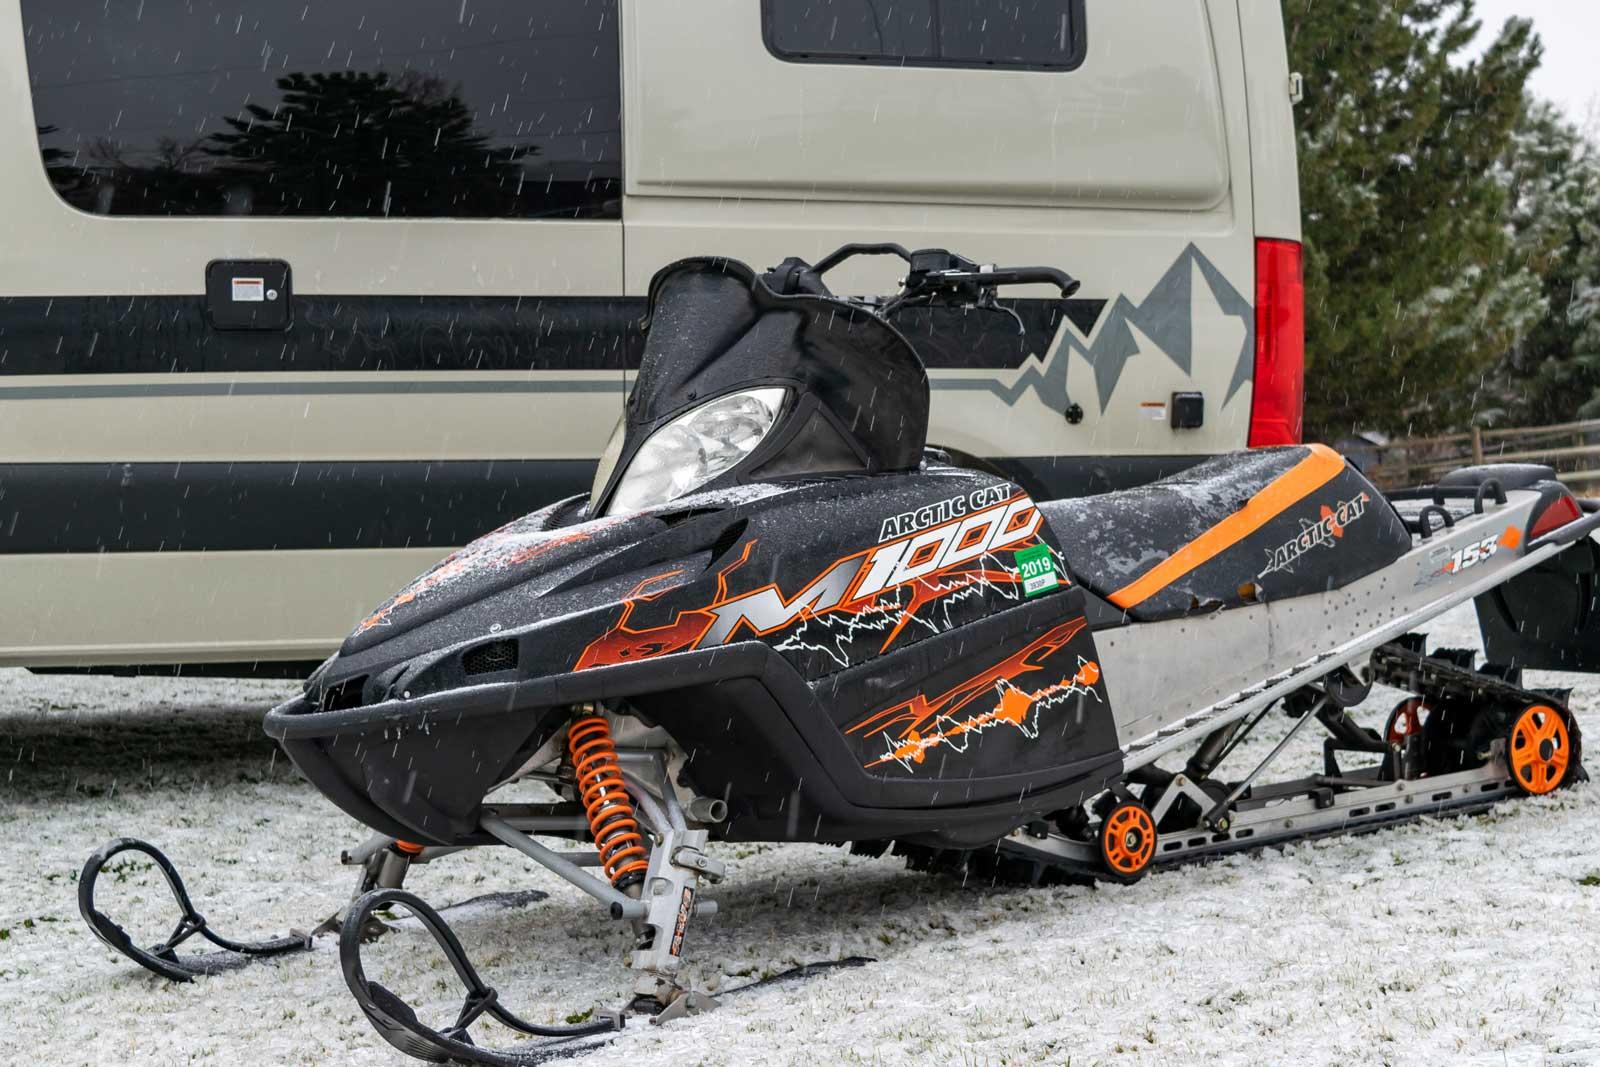 A snowmobile in front of an Antero Adventure Van